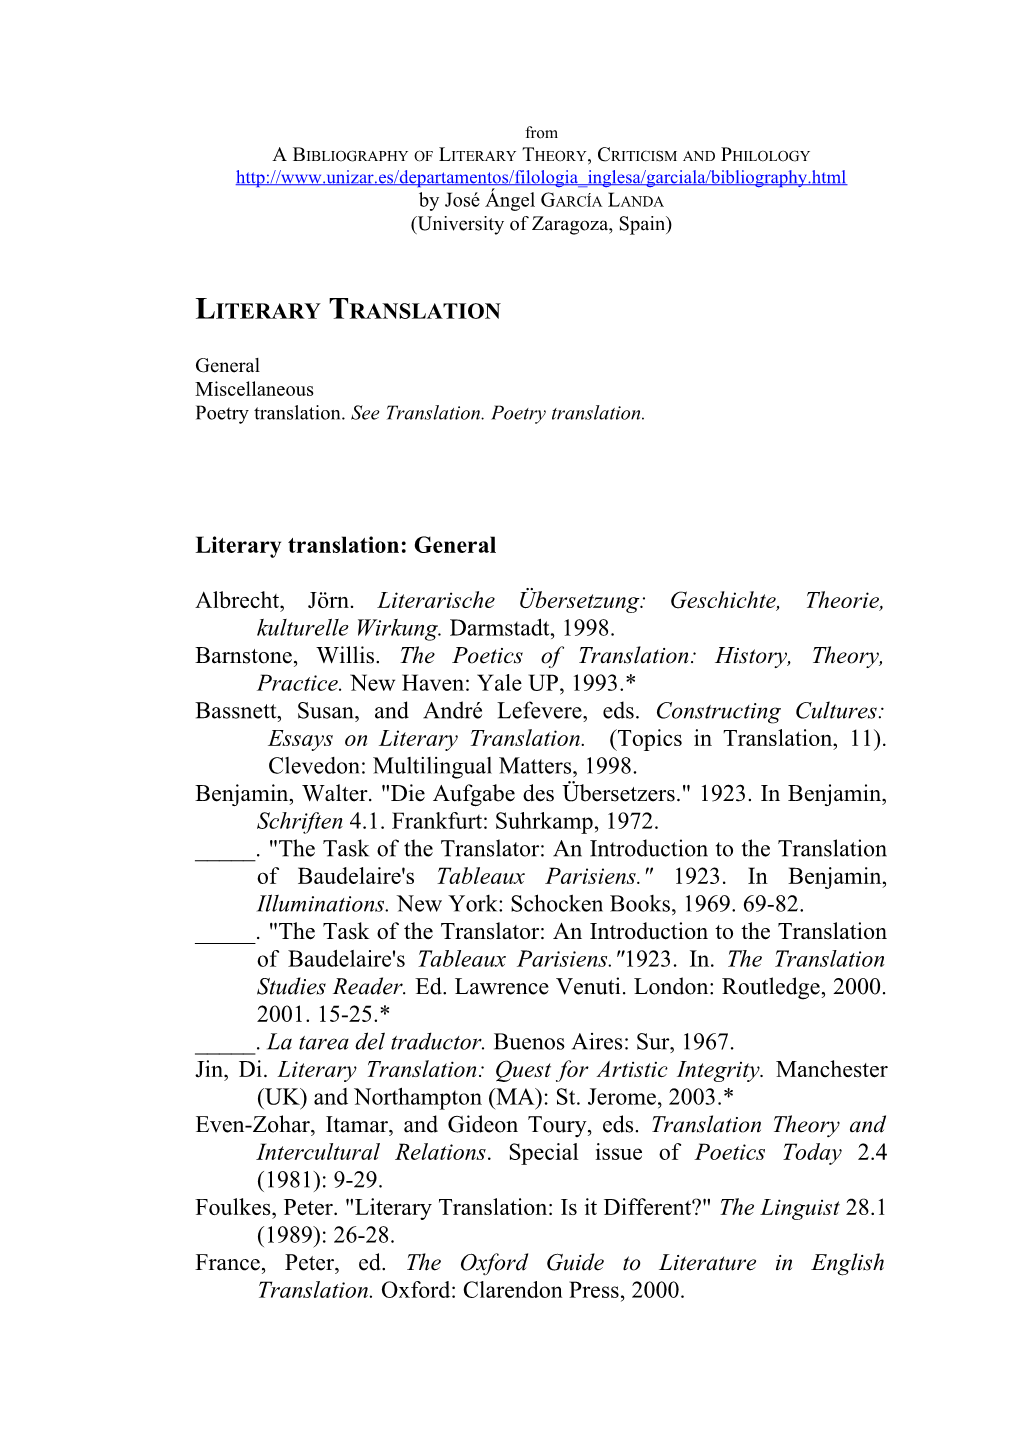 A Bibliography of Literary Theory, Criticism and Philology s87